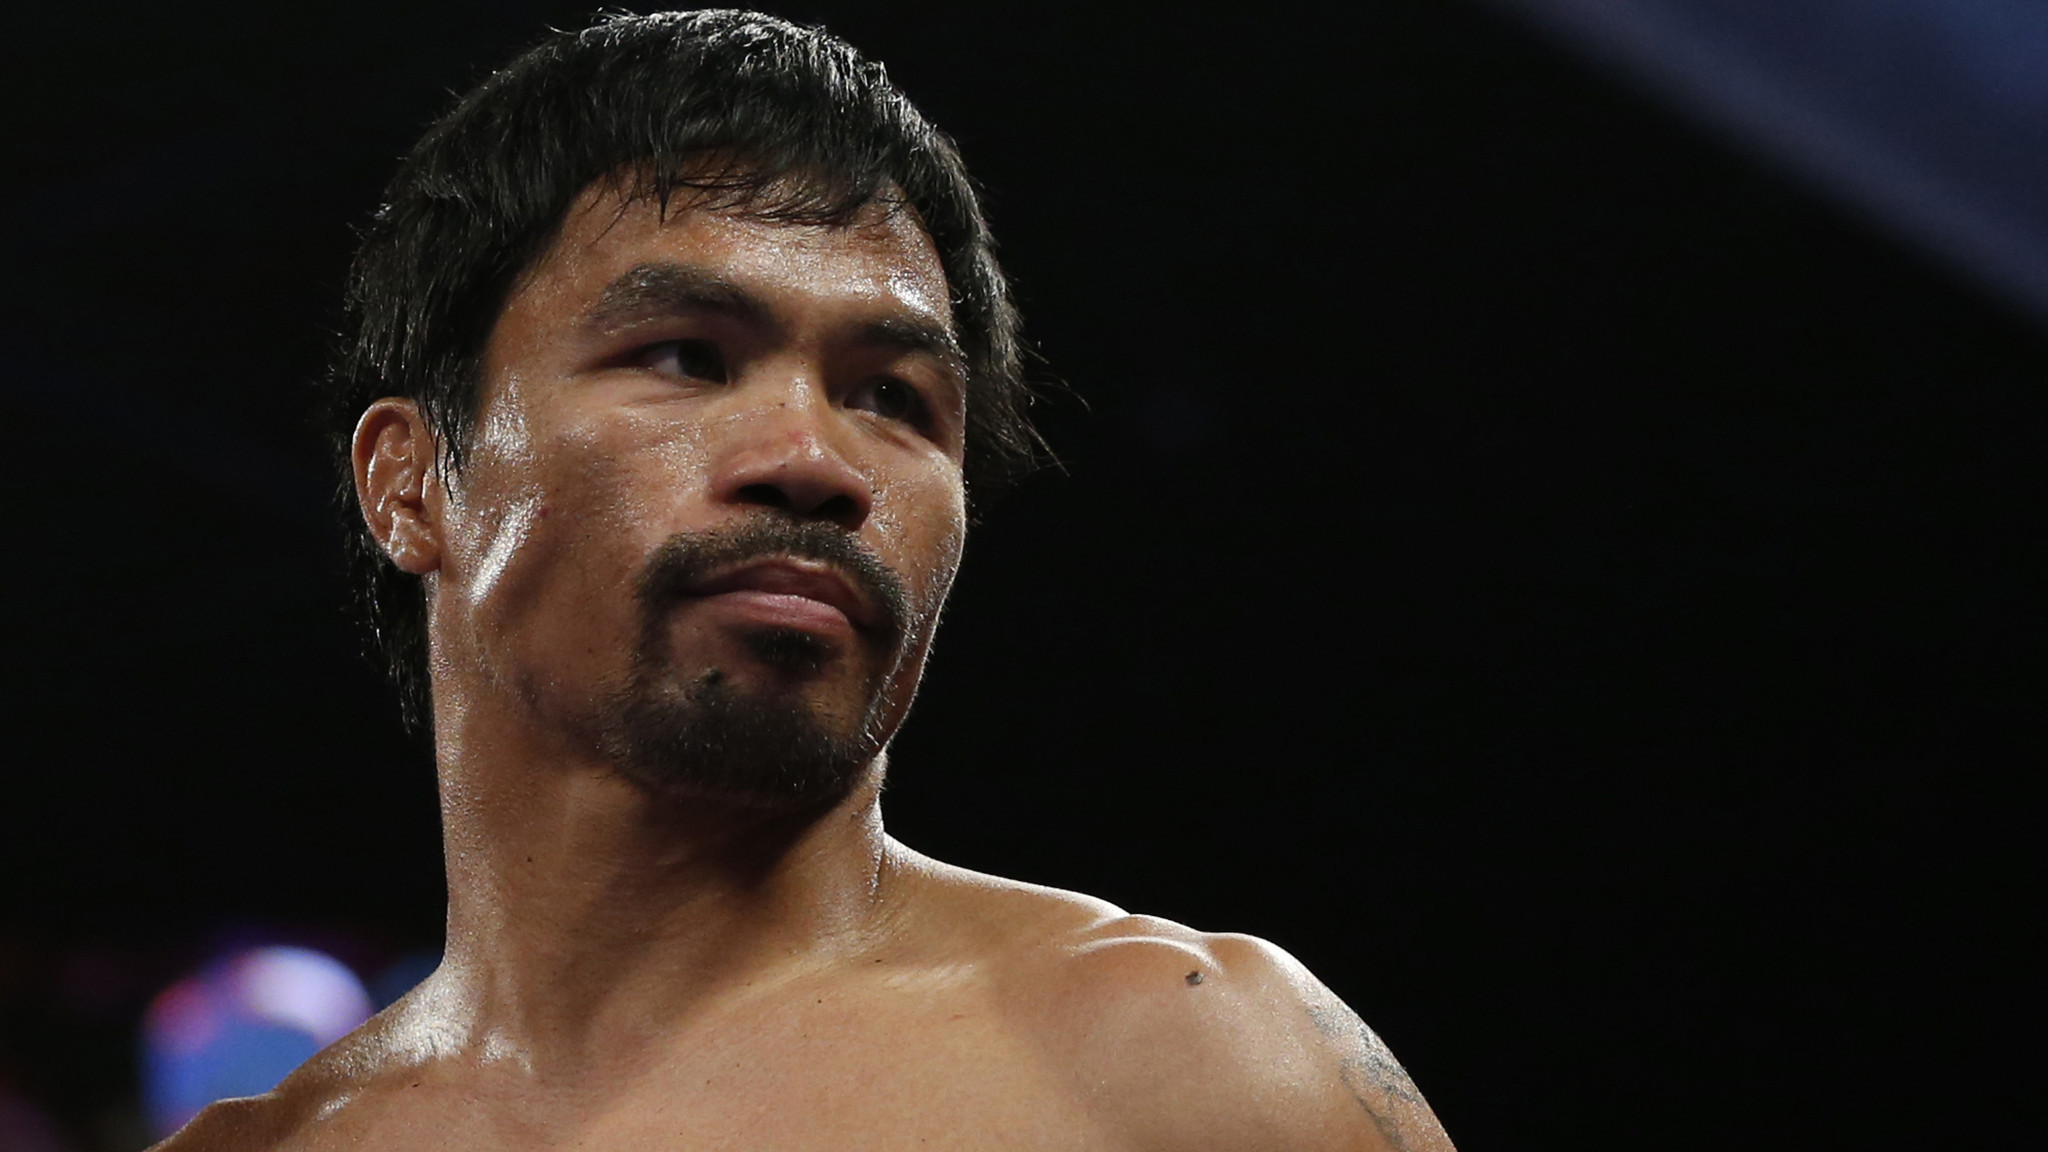 Manny Pacquiao: Floyd Mayweather should sign this month to fight.